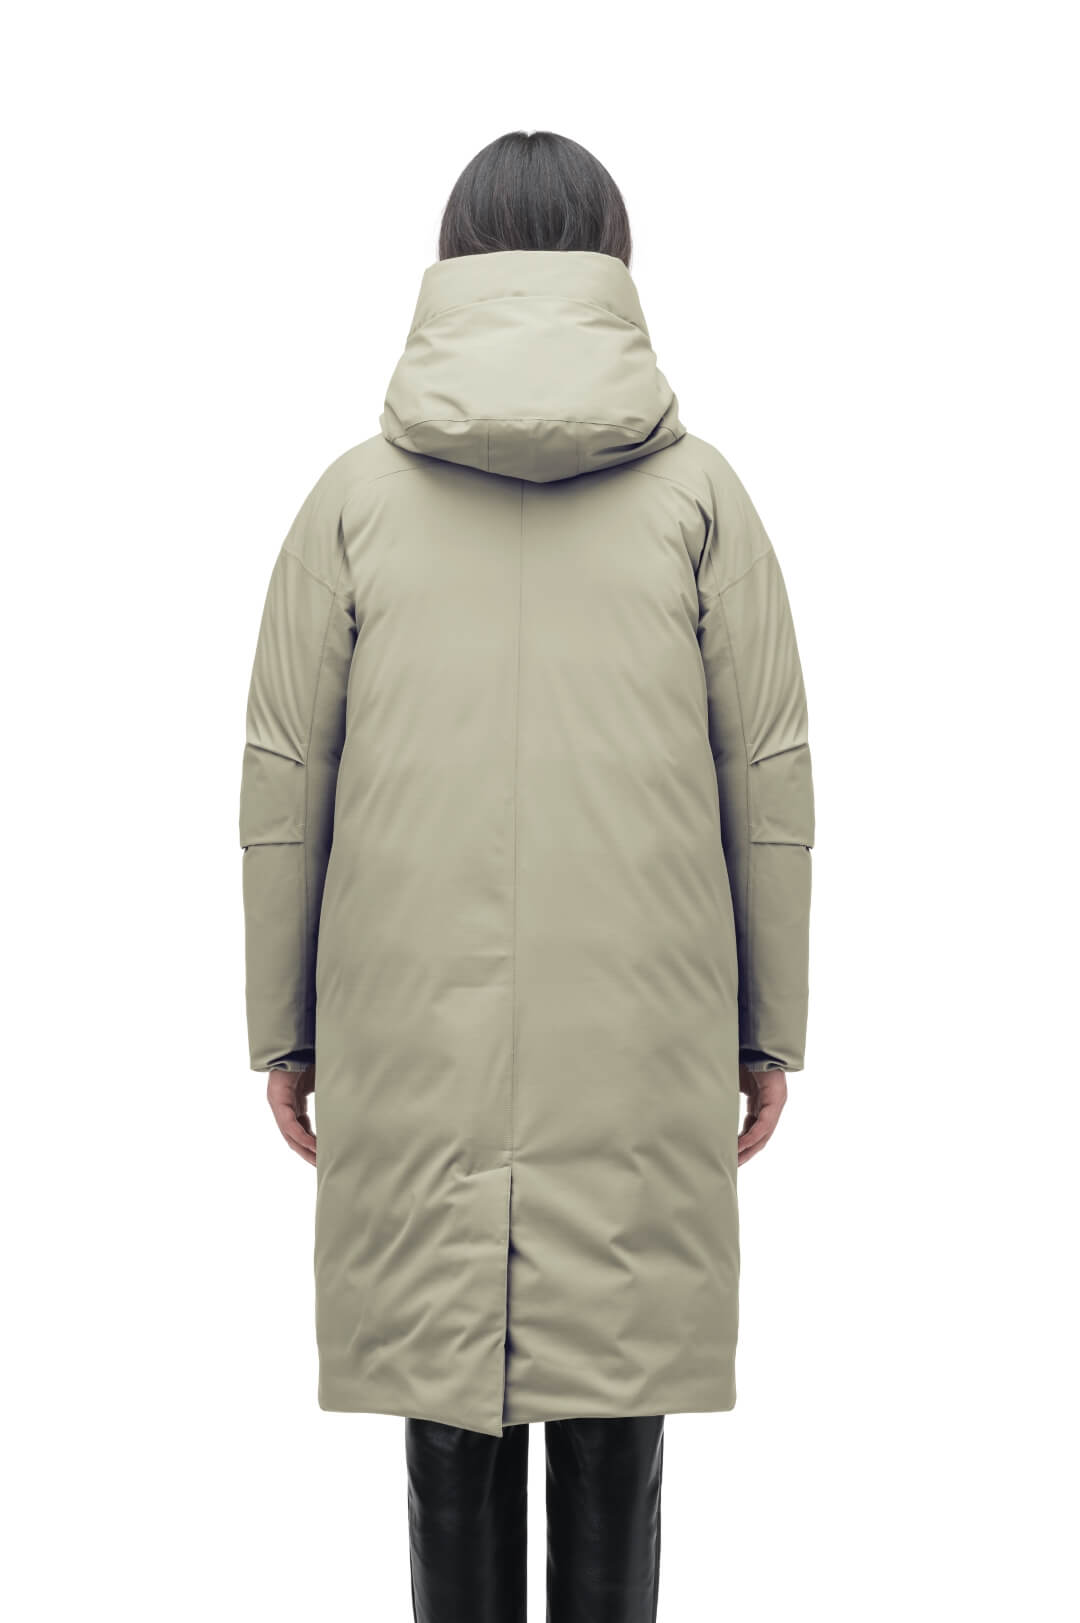 Axis Ladies Oversized Coat in knee length, Canadian duck down insulation, and two-way front zipper, in Tea